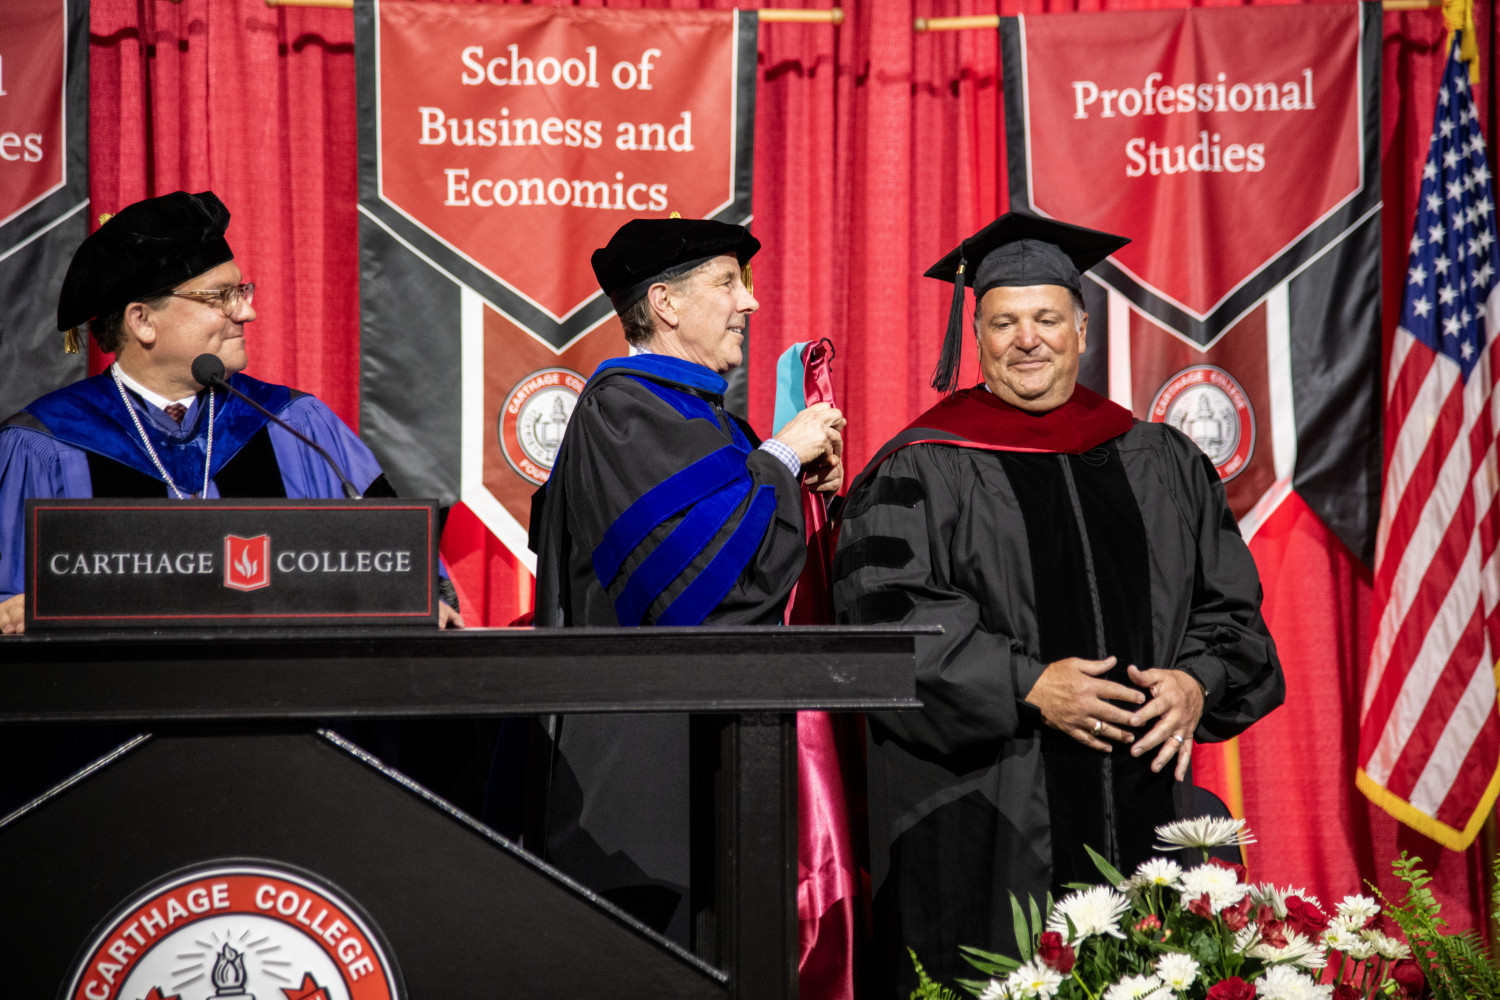 Aldo Madriagano receiving an honorary Doctor of Public Service degree.